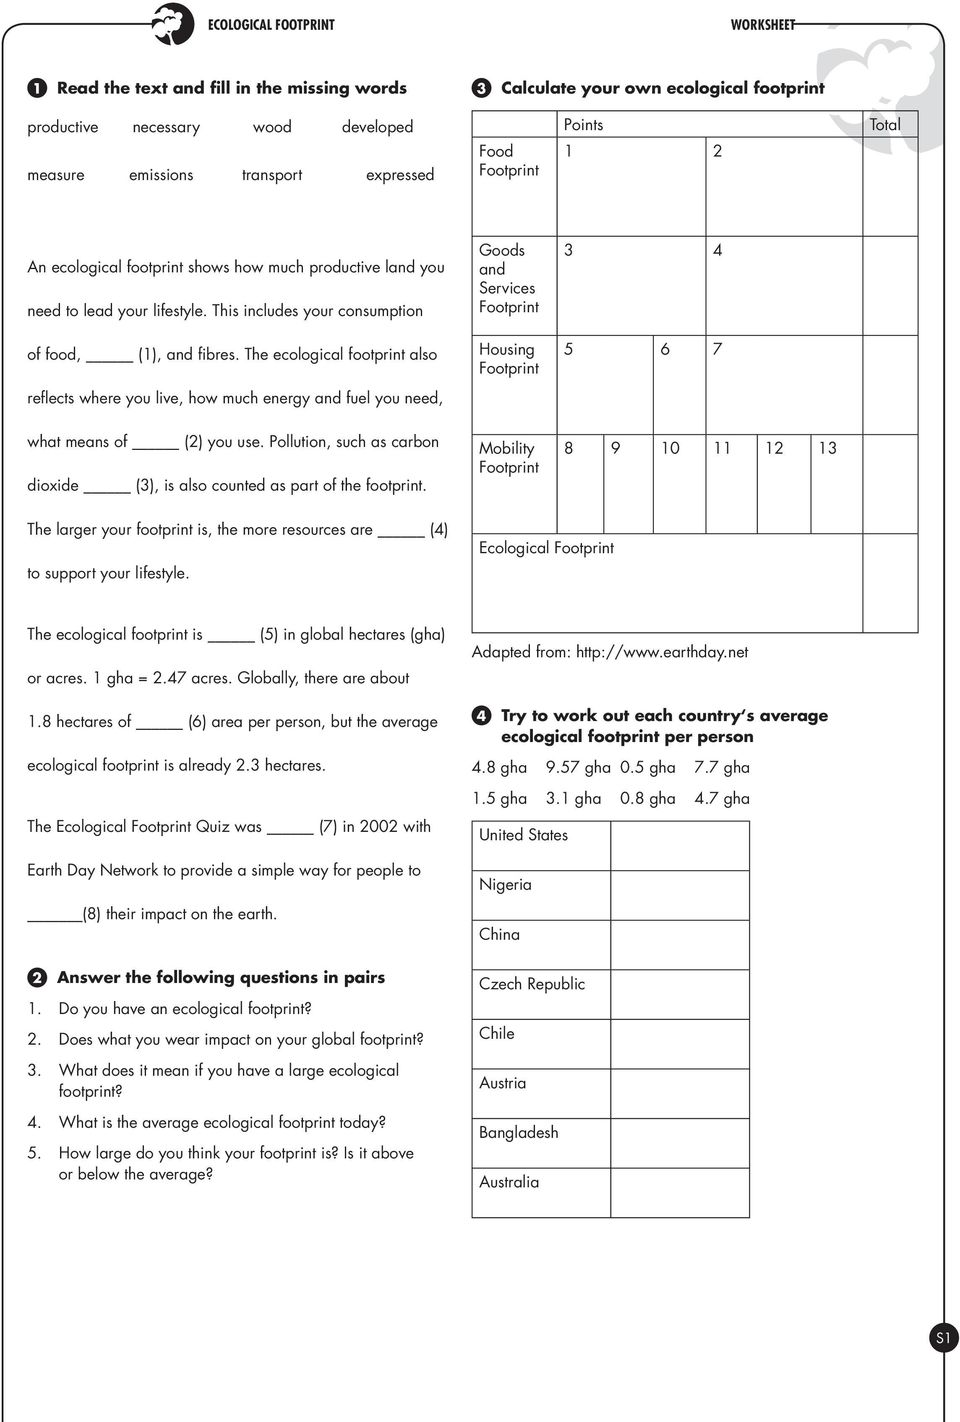 ECOLOGICAL FOOTPRINT - PDF Free Download Intended For Human Footprint Worksheet Answers